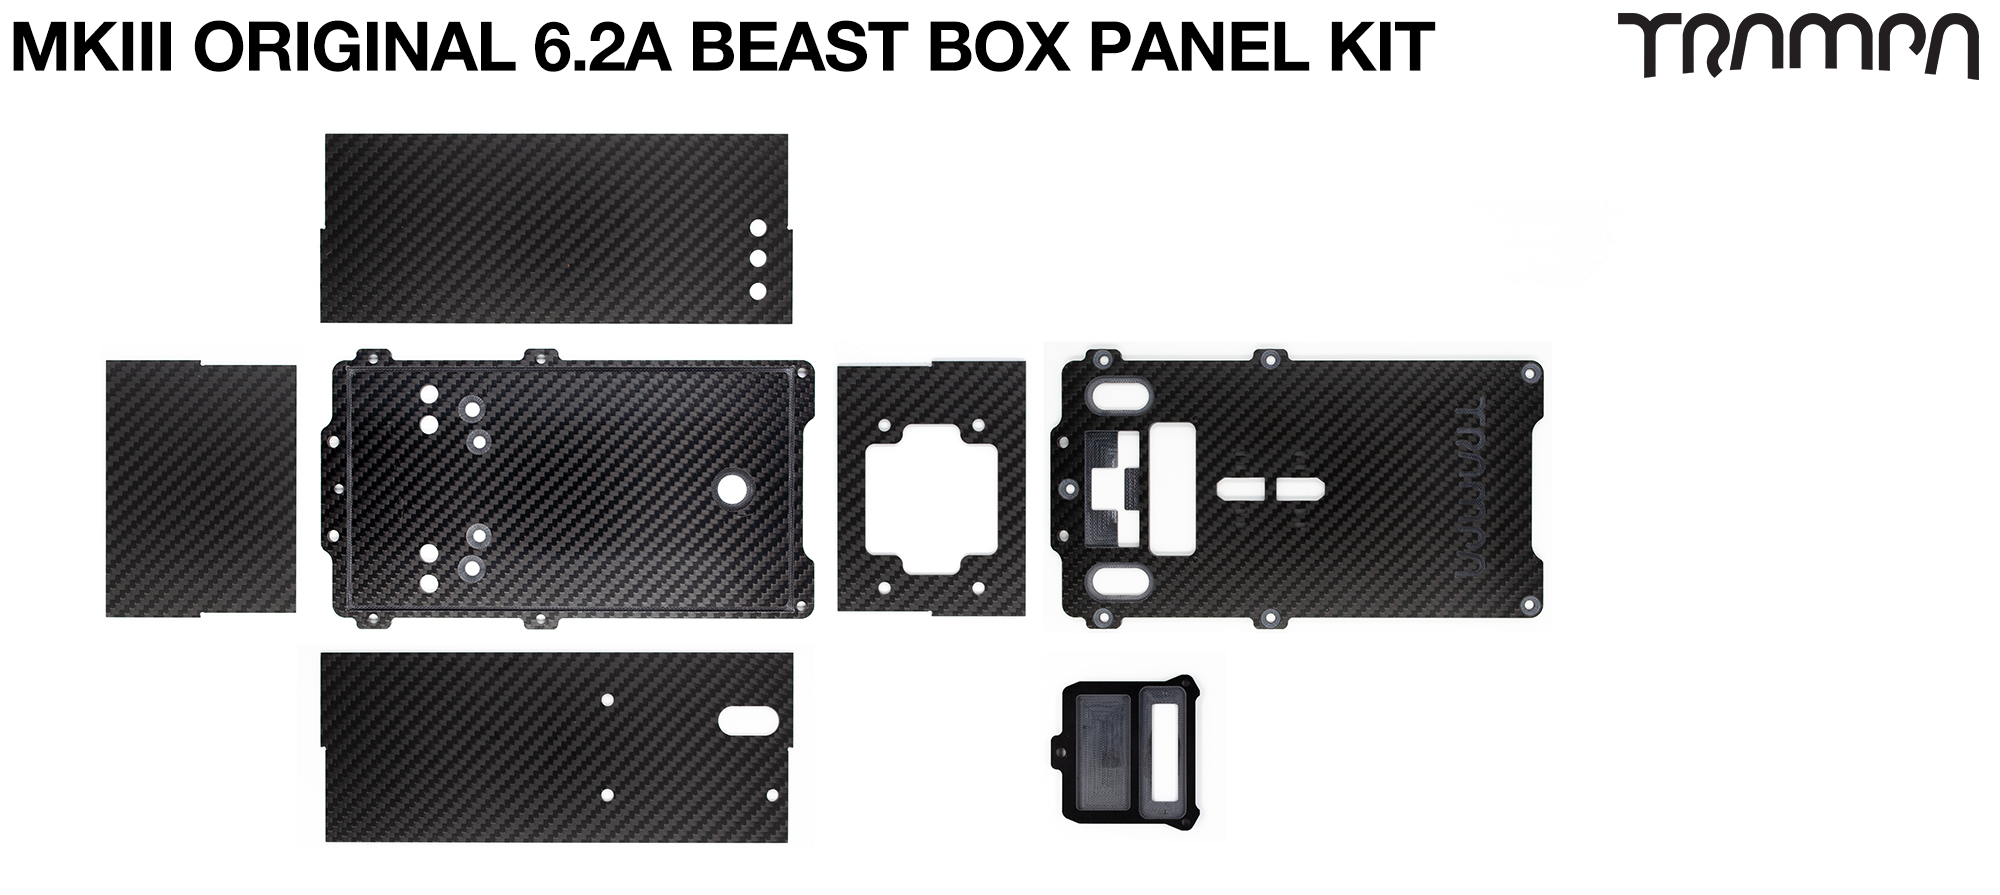 MkIII BEAST Box Carbon Fibre Panel kit with integrated LED & NRF Housing - Fits 2x 6200 Zippy compact